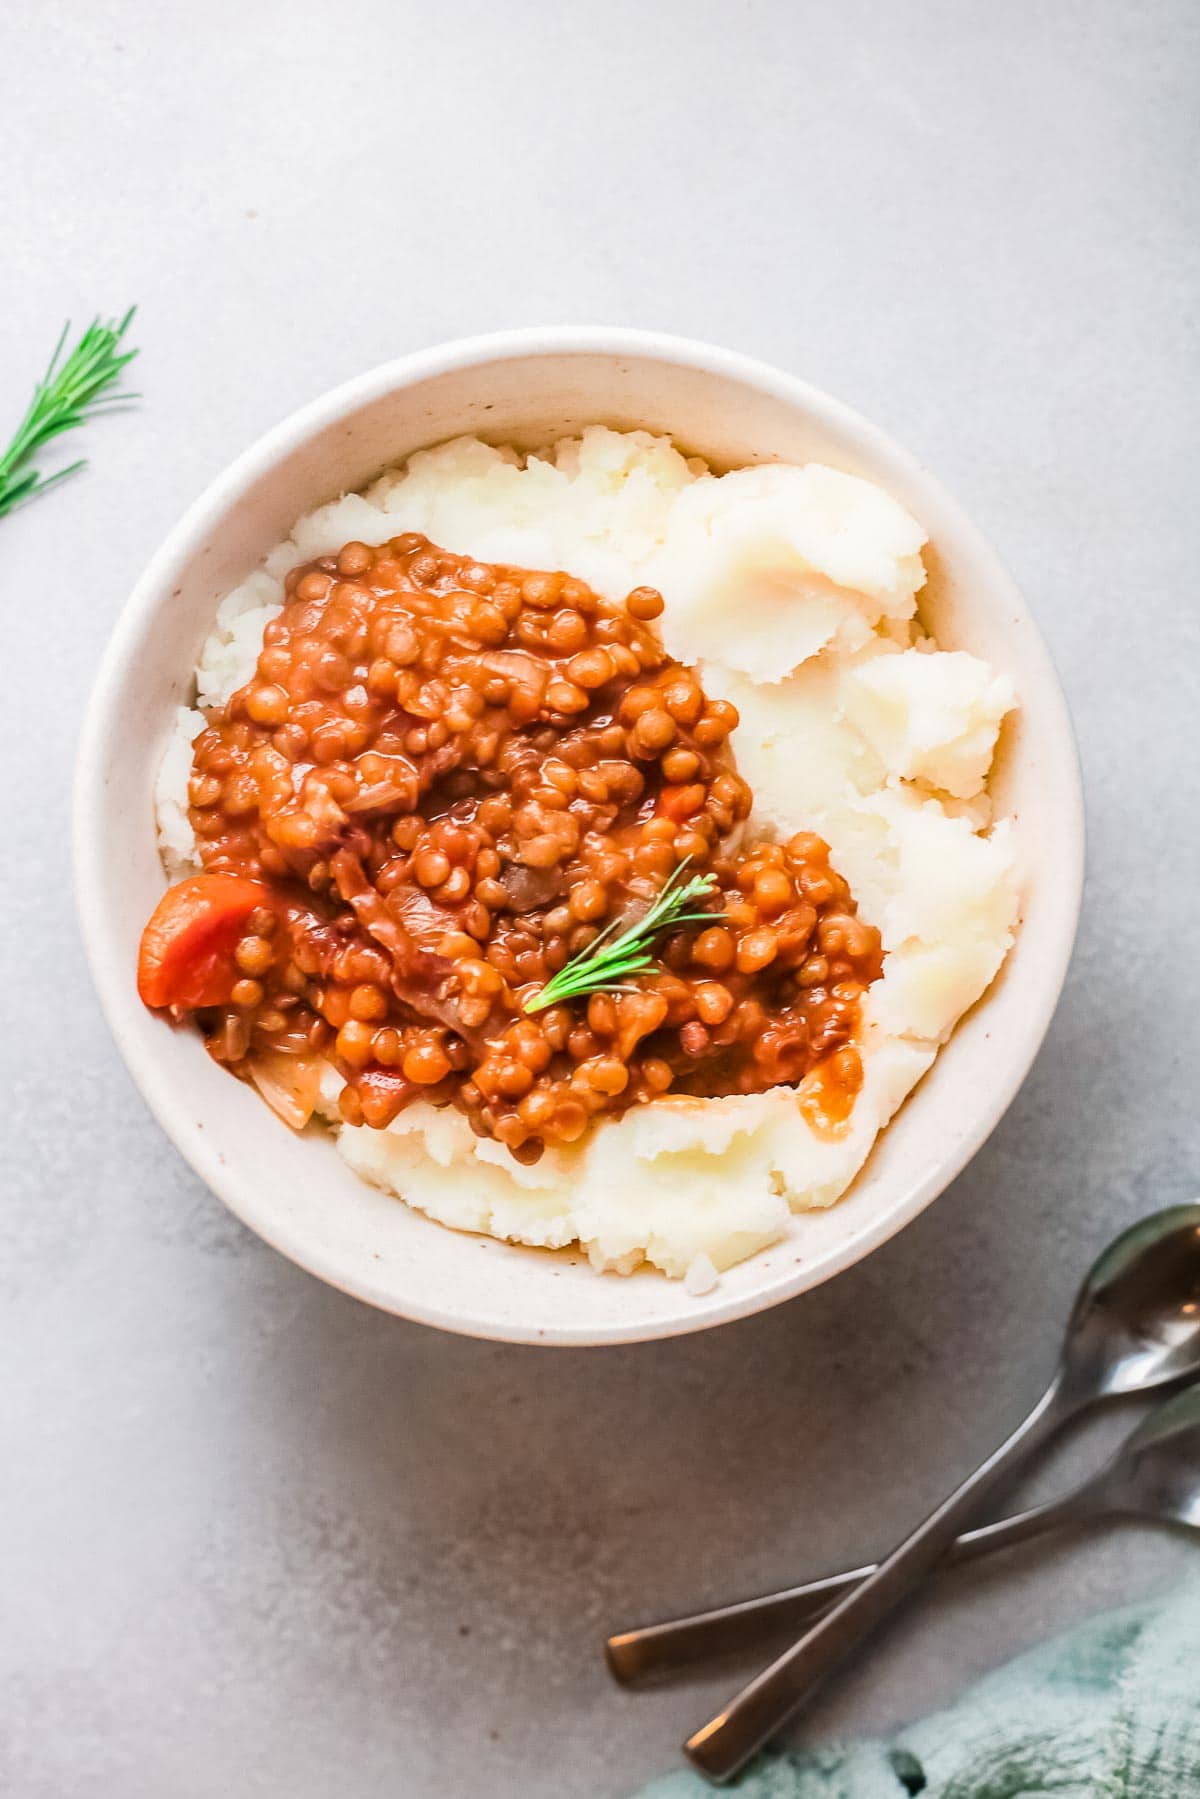 lentils with mashed potatoes